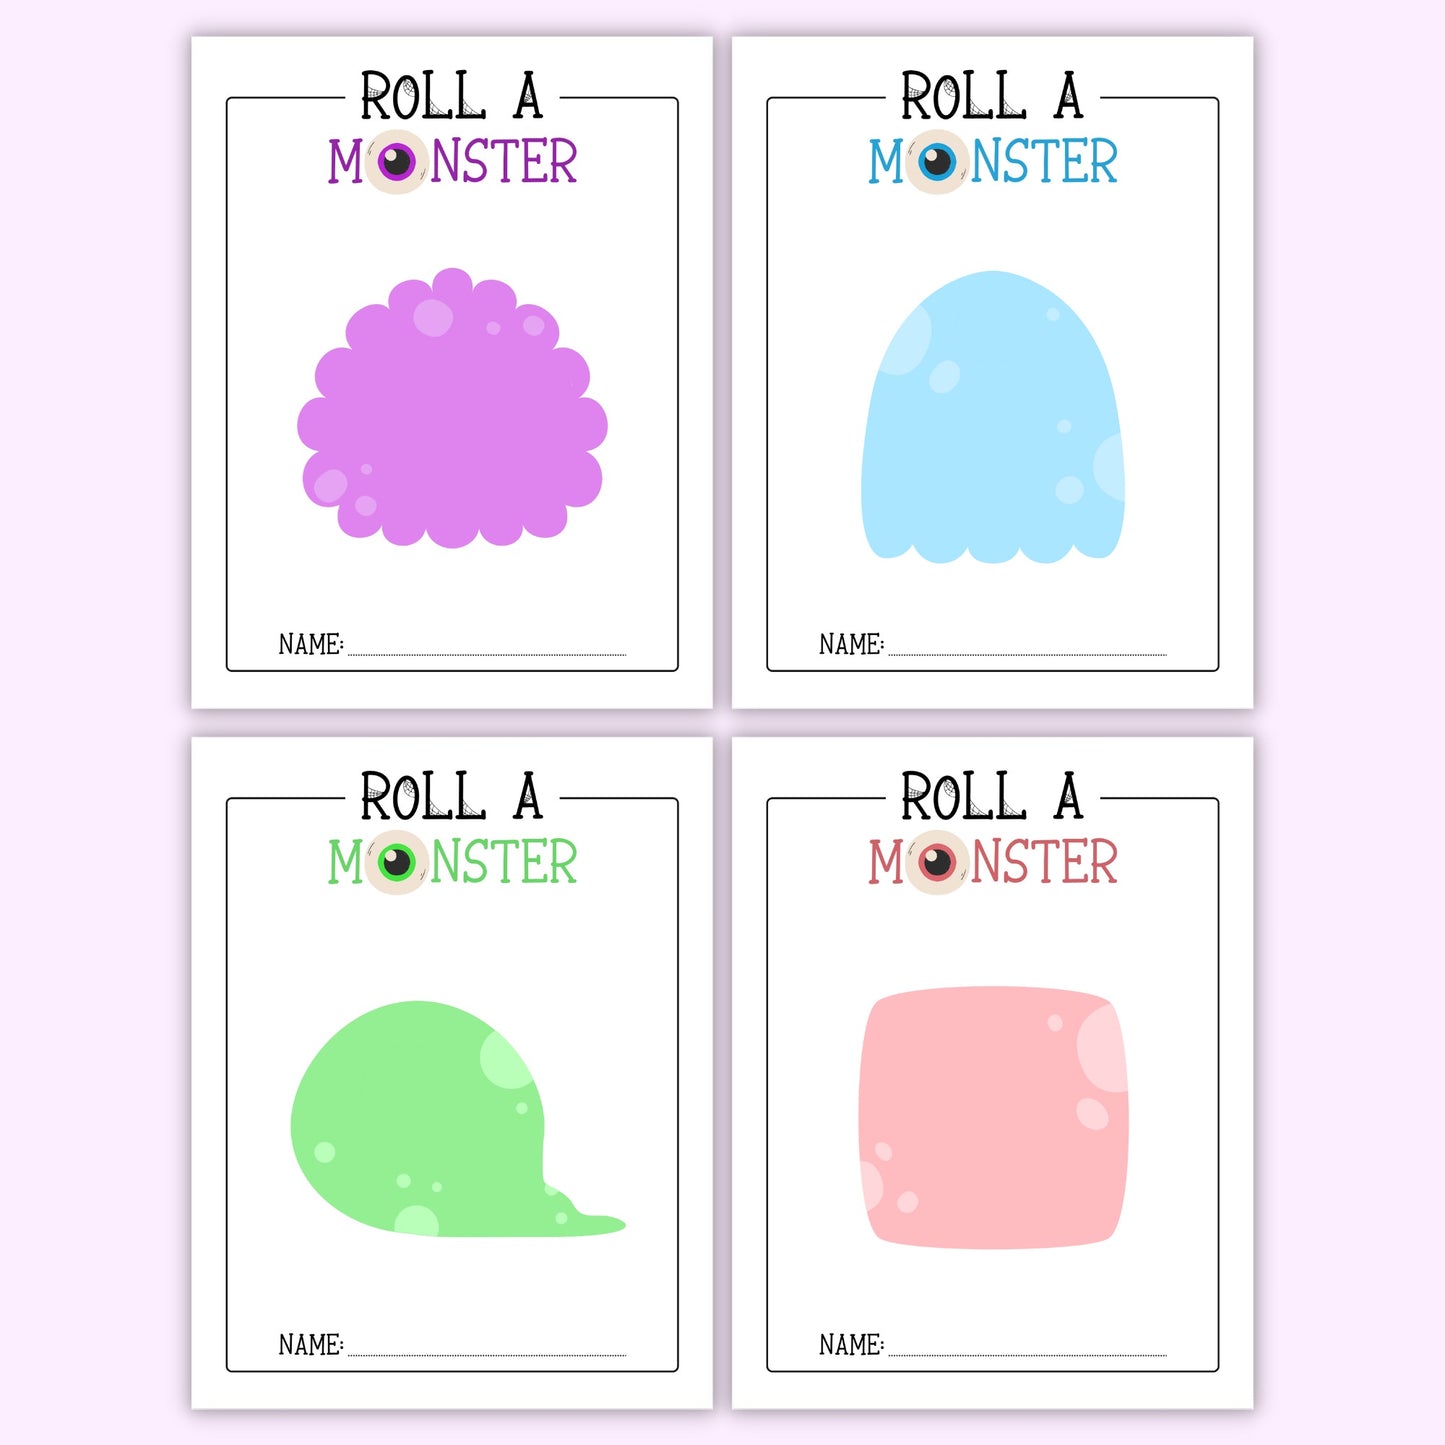 Roll a Monster Game